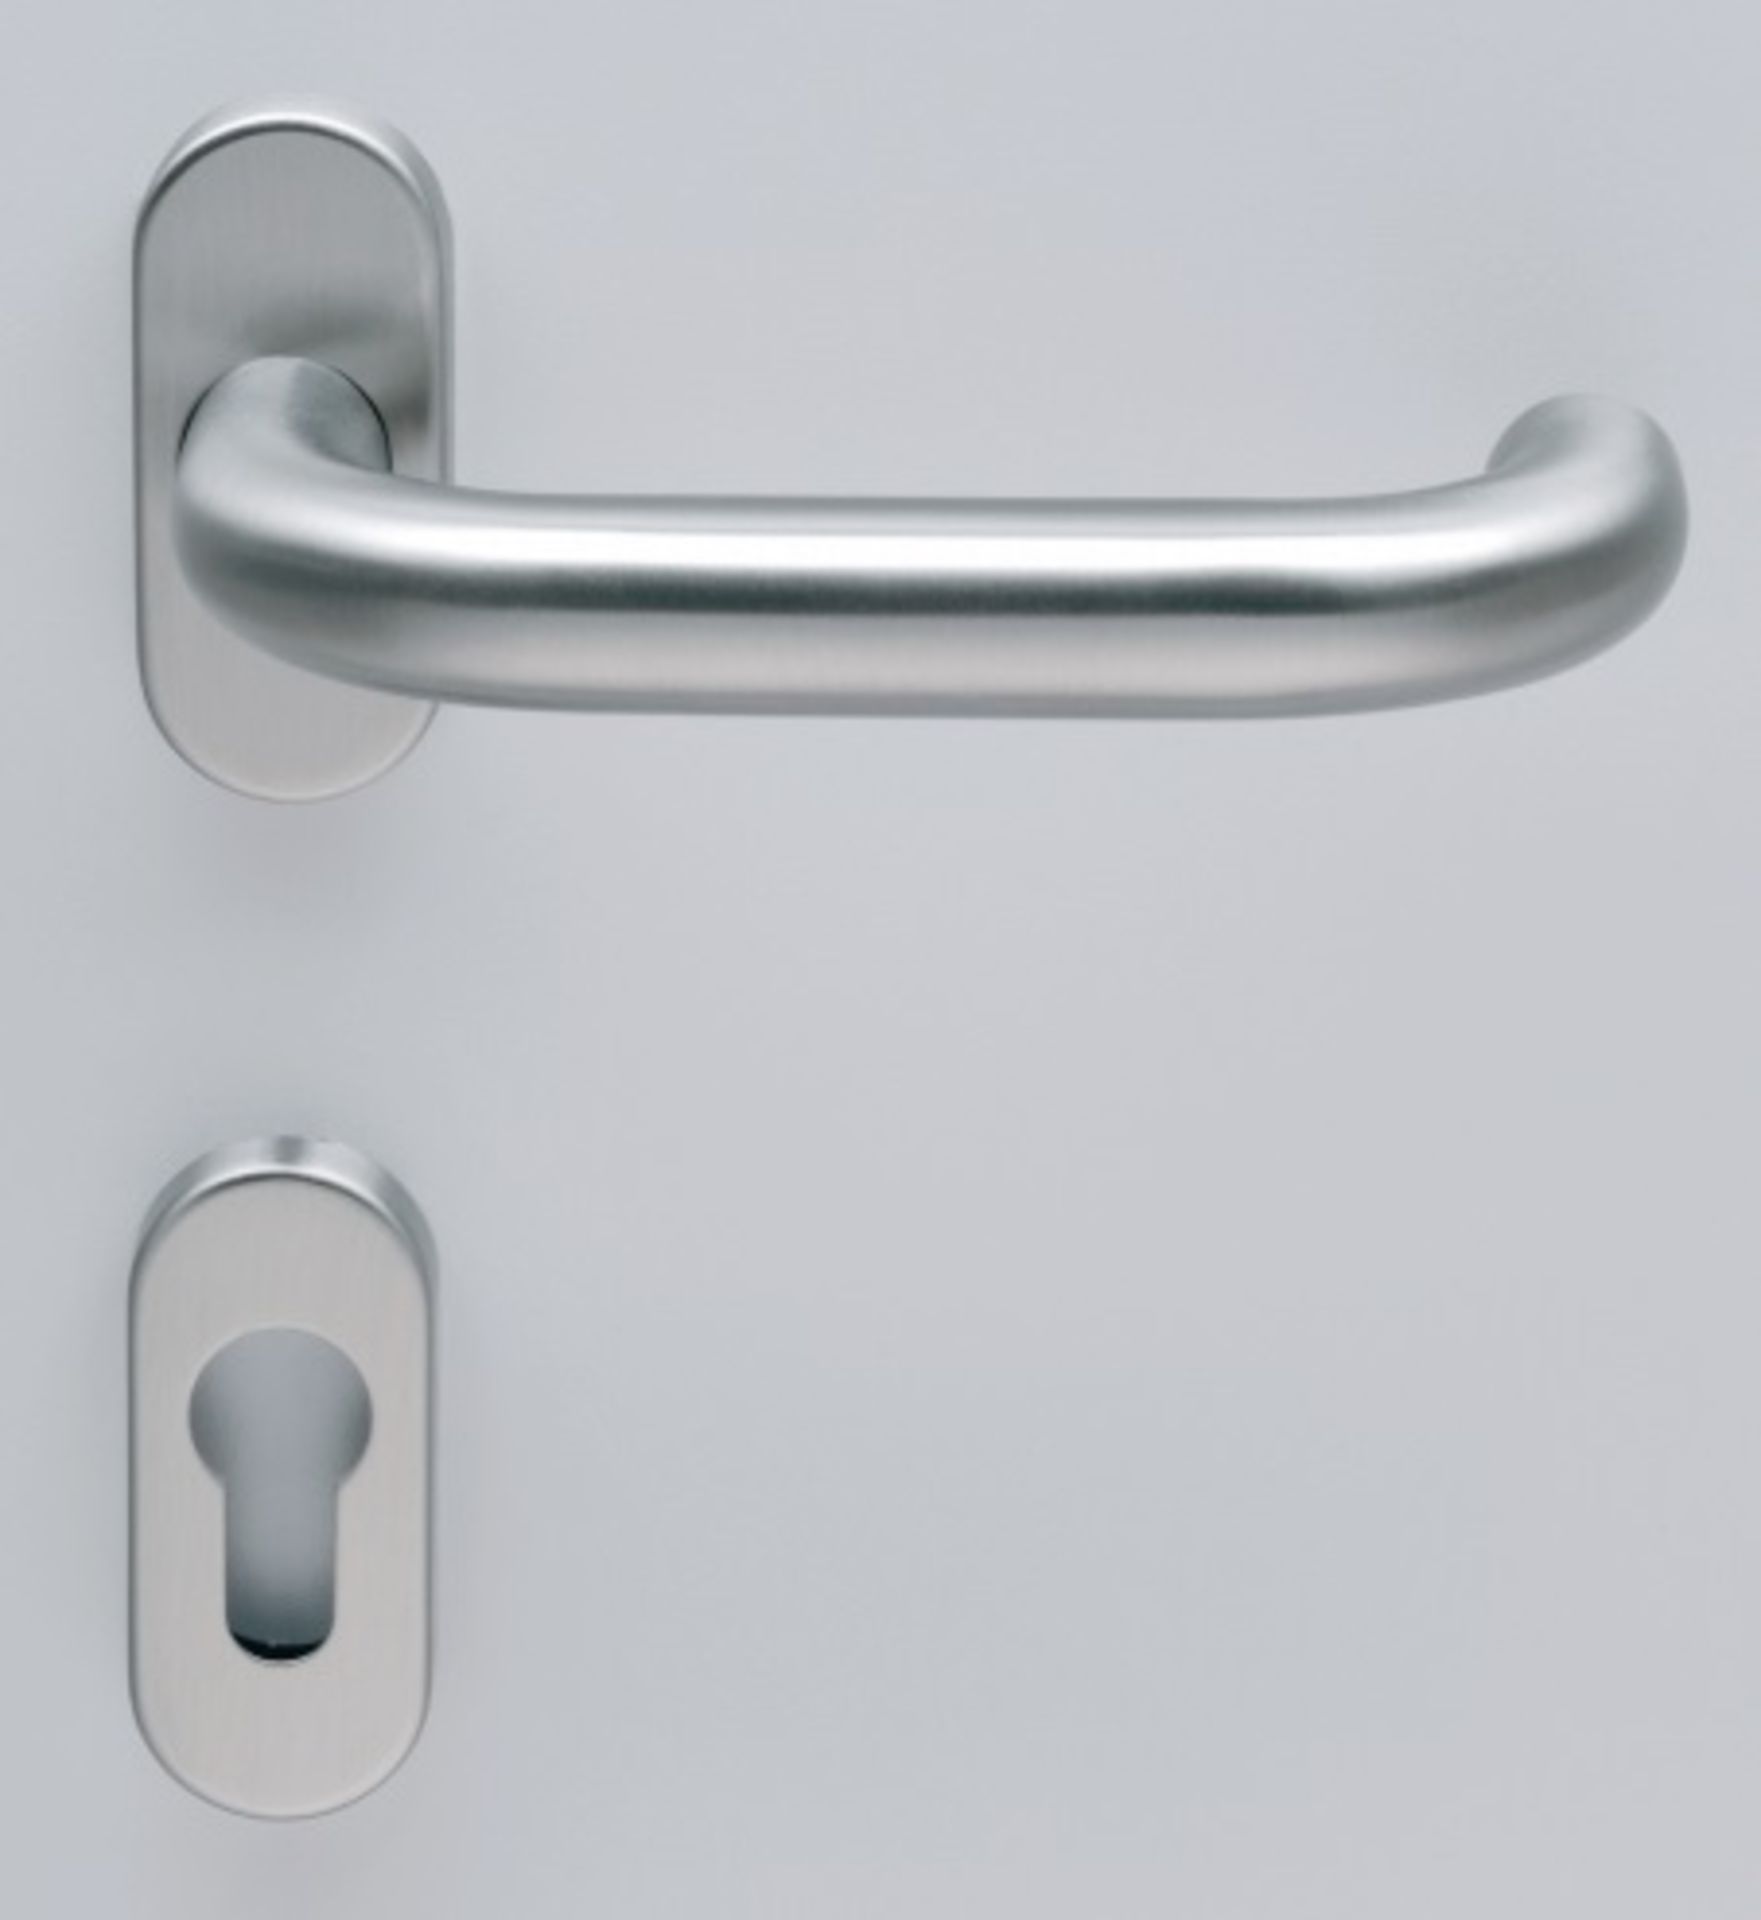 2 x Pairs Of Allegion Stainless Steel Door Levers On Rose With A Brushed Finish